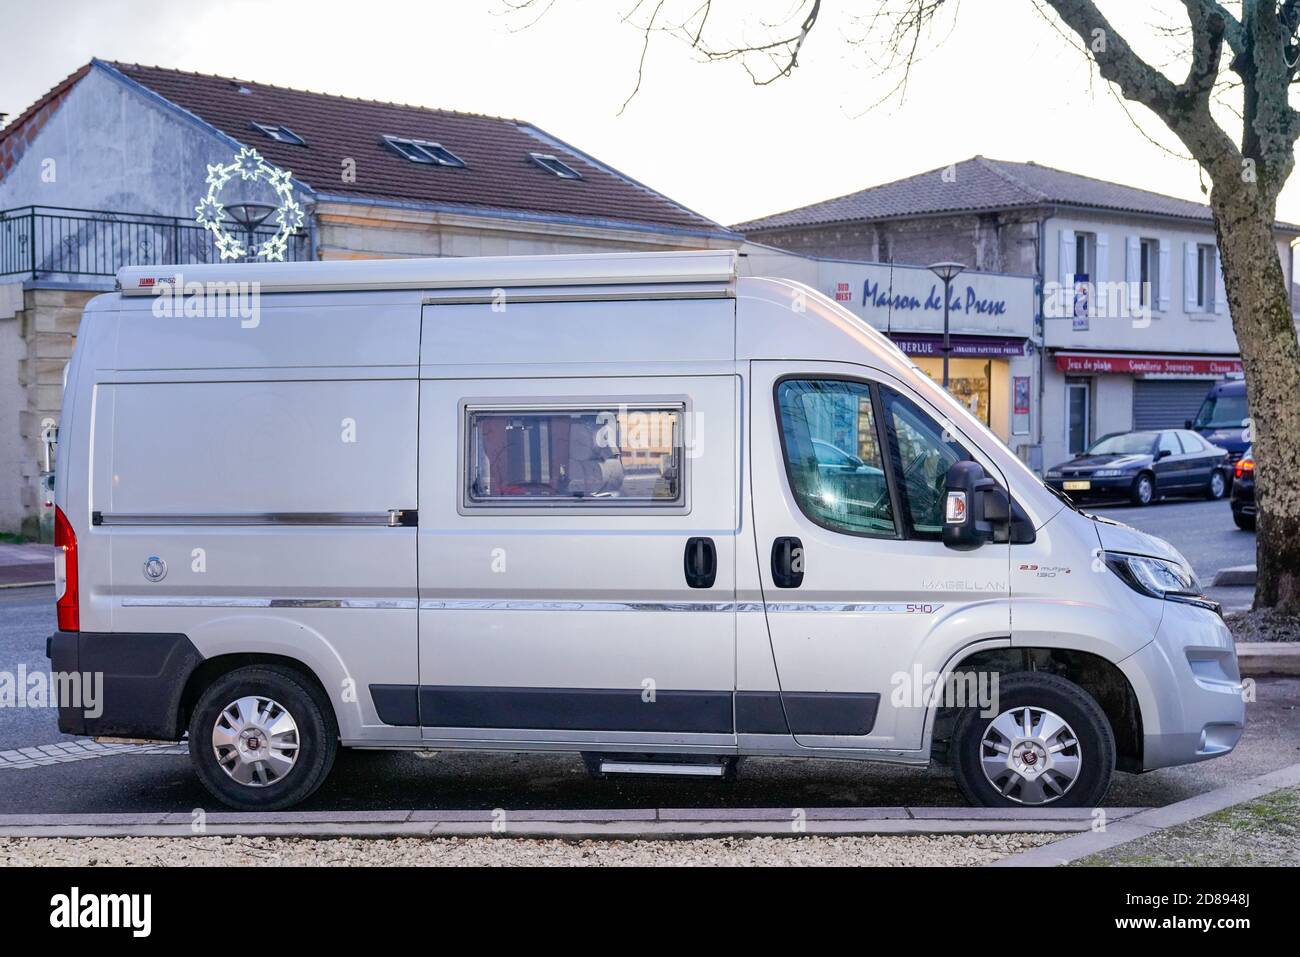 Ares, Aquitaine / France - 16 10 2020 : Fiat ducato RV holiday trip in  motorhome Caravan car Vacation with camper van parked in city Stock Photo -  Alamy